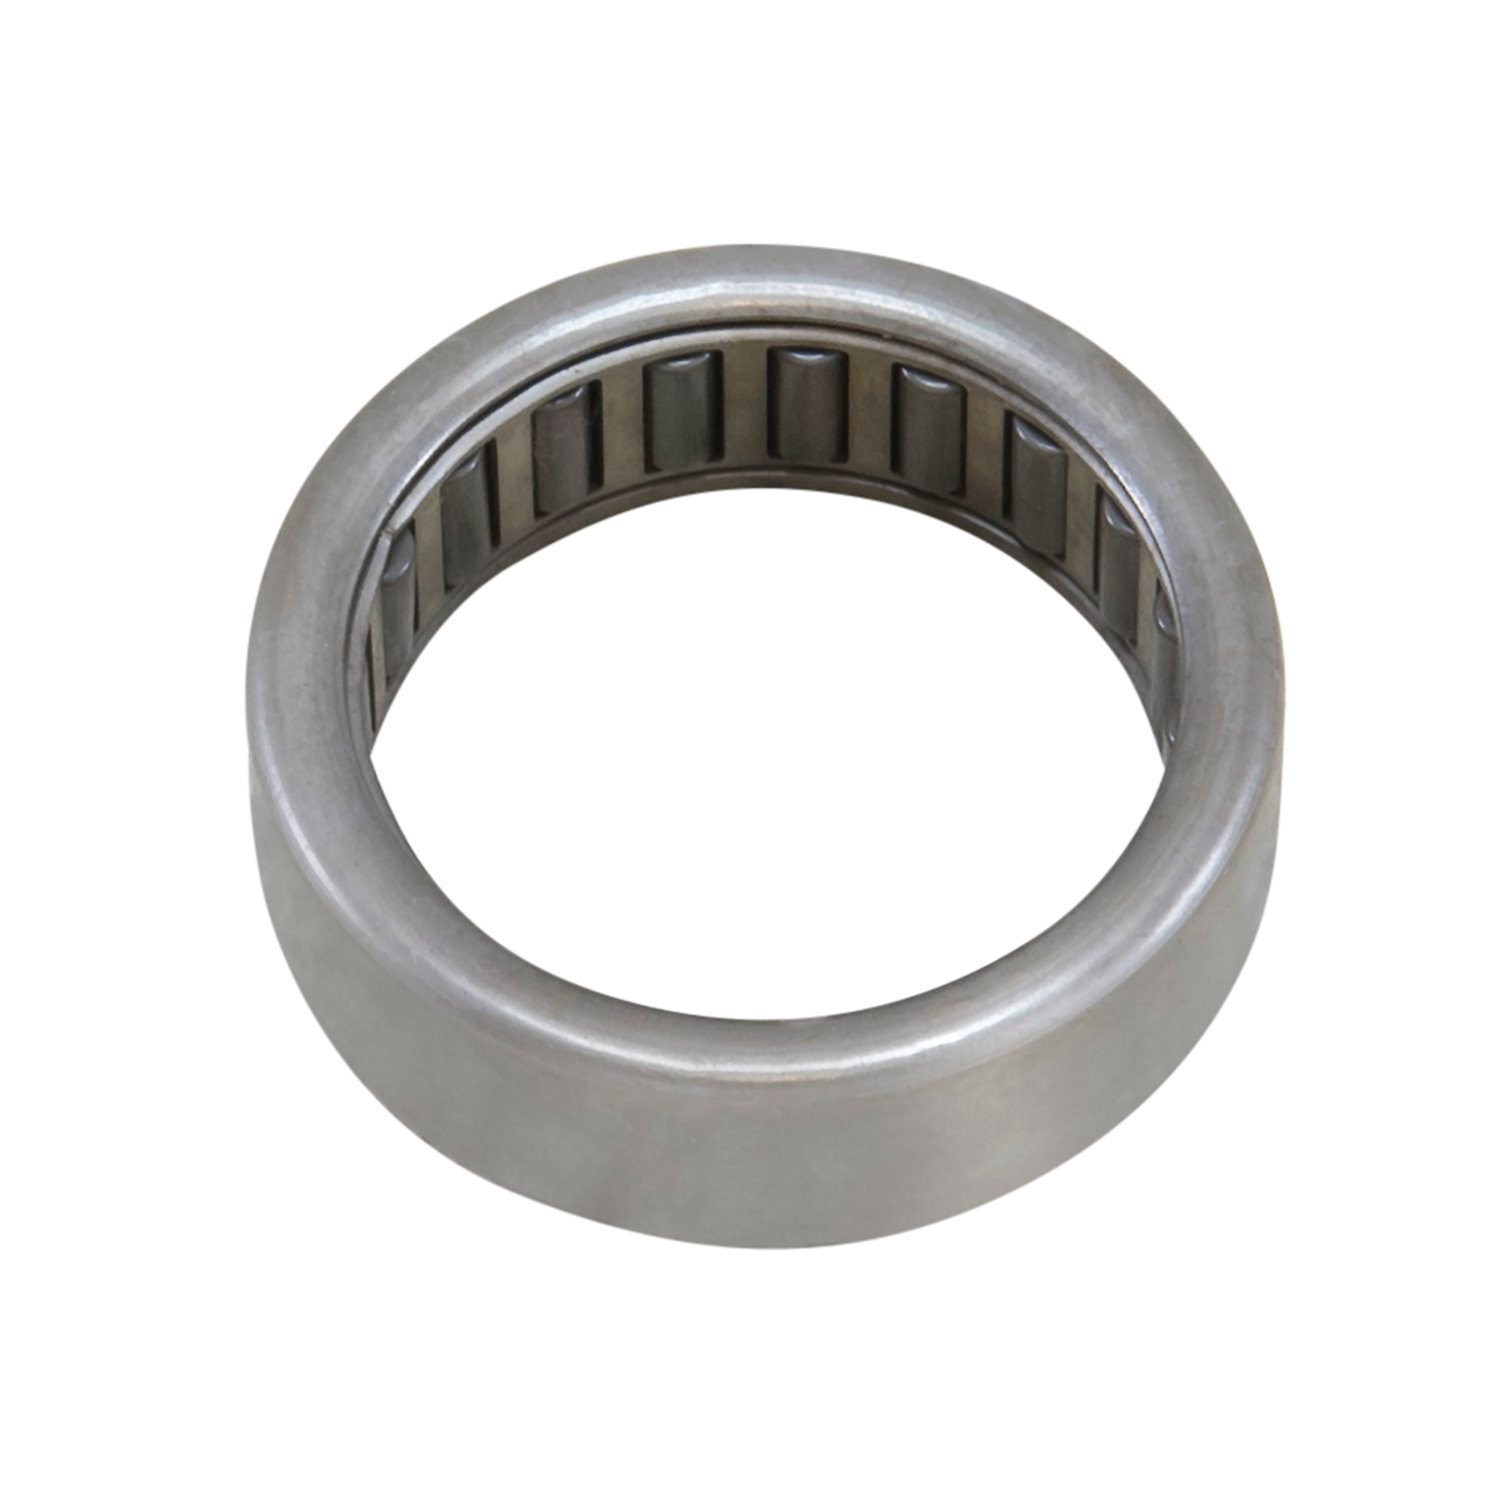 8.25 in. Ifs GM Axle Bearing With 1.625